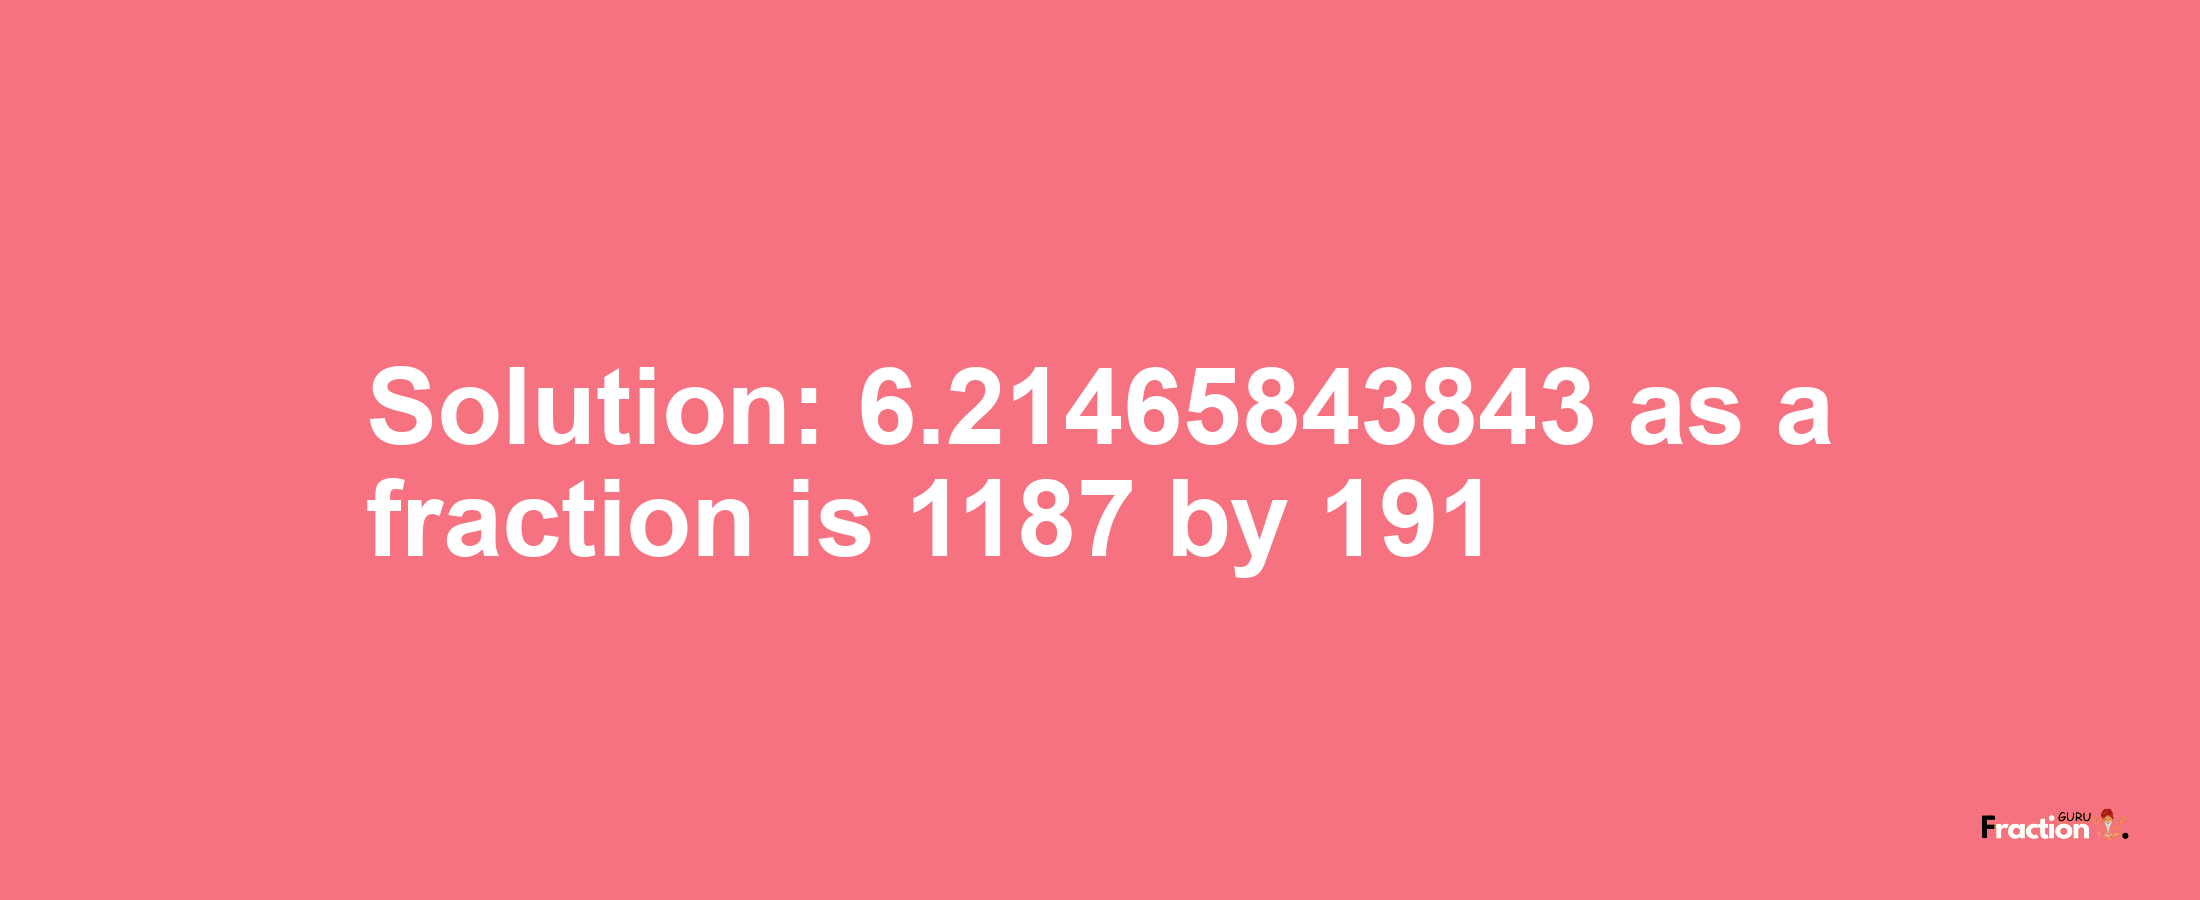 Solution:6.21465843843 as a fraction is 1187/191